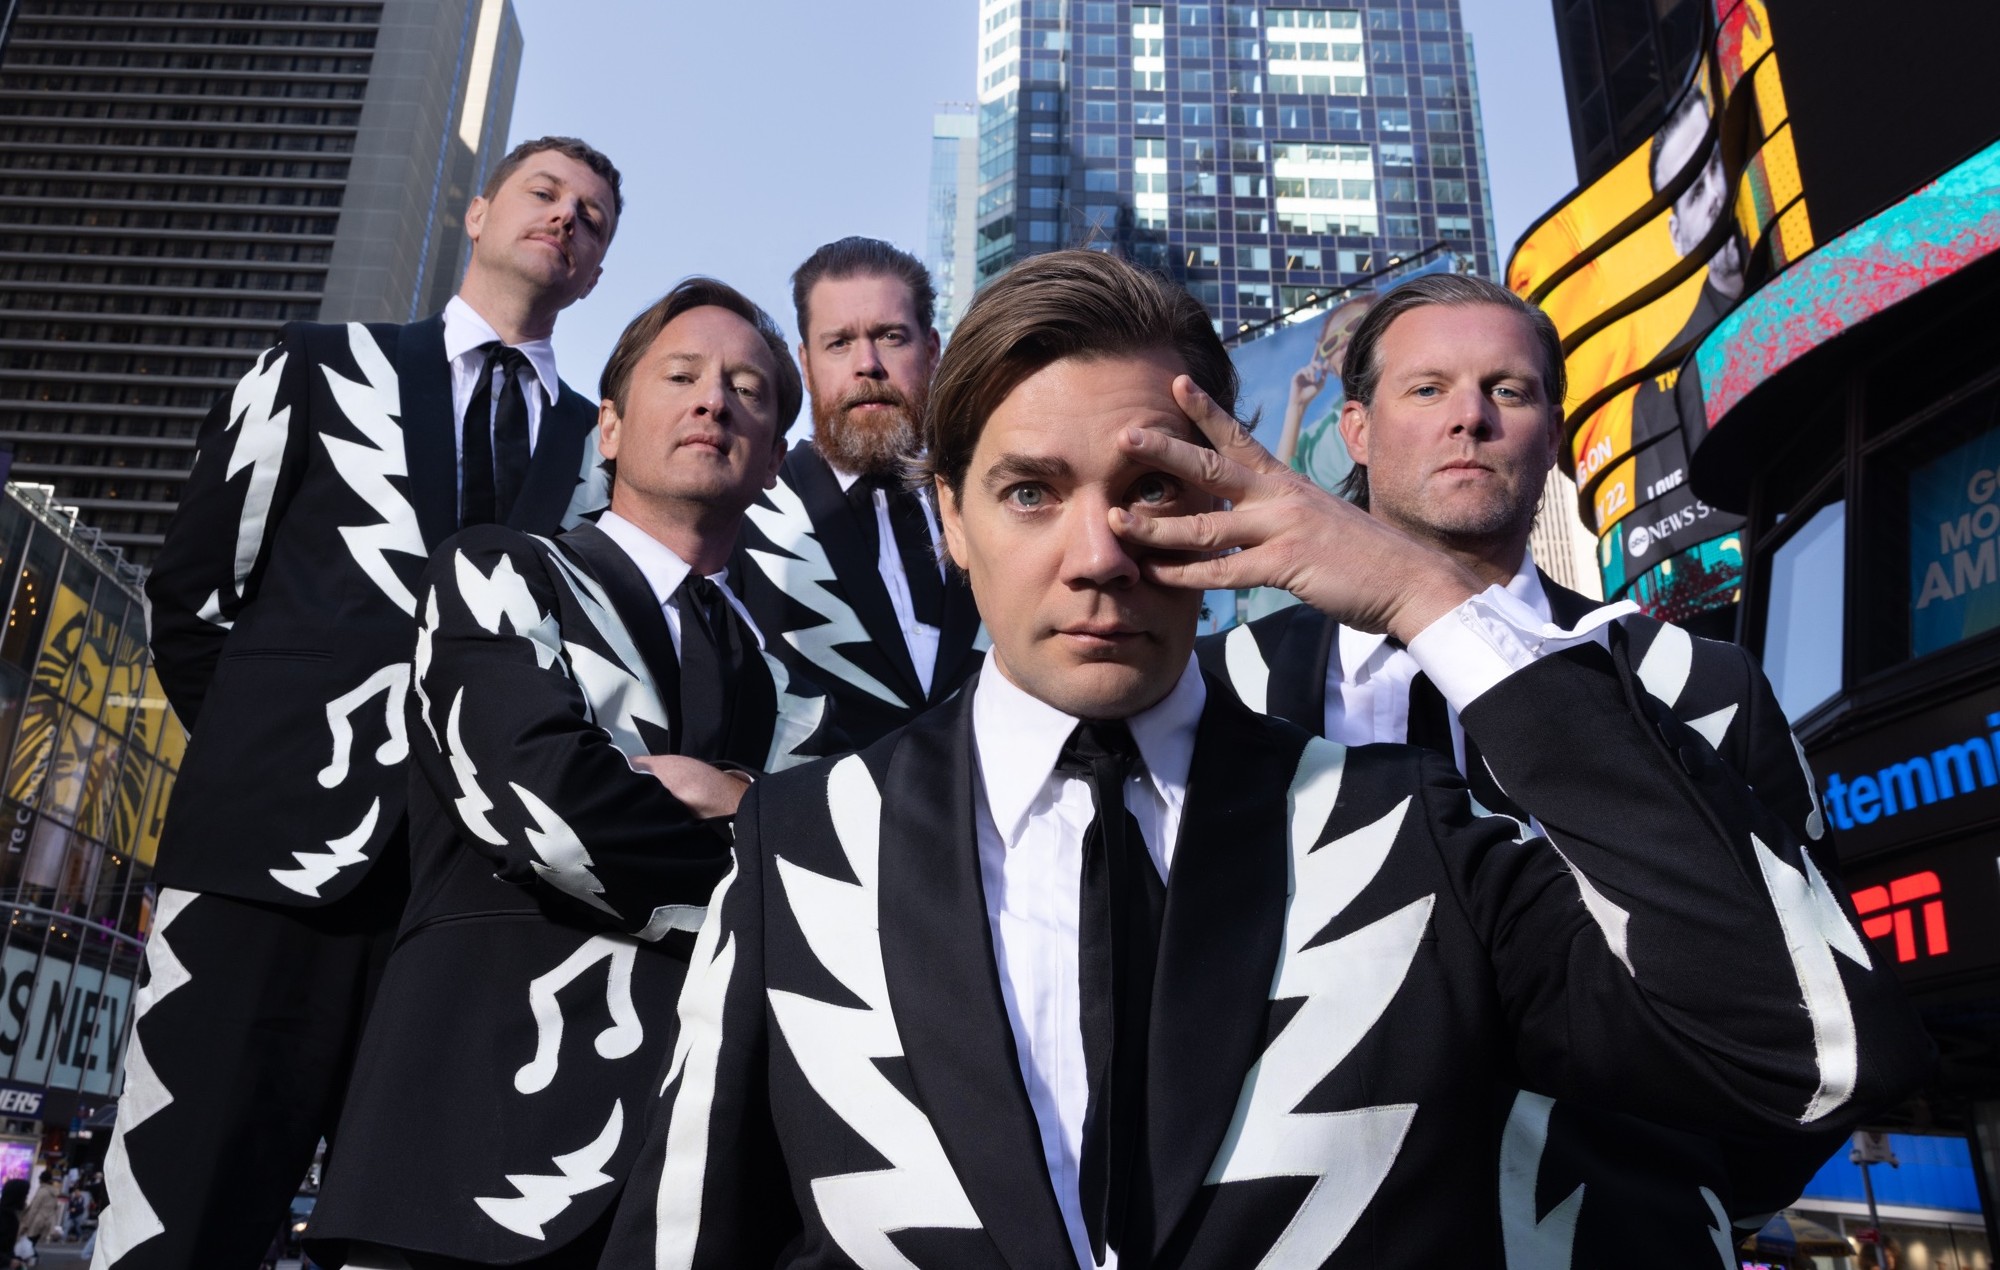 The Hives: The Death of Randy Fitzsimmons